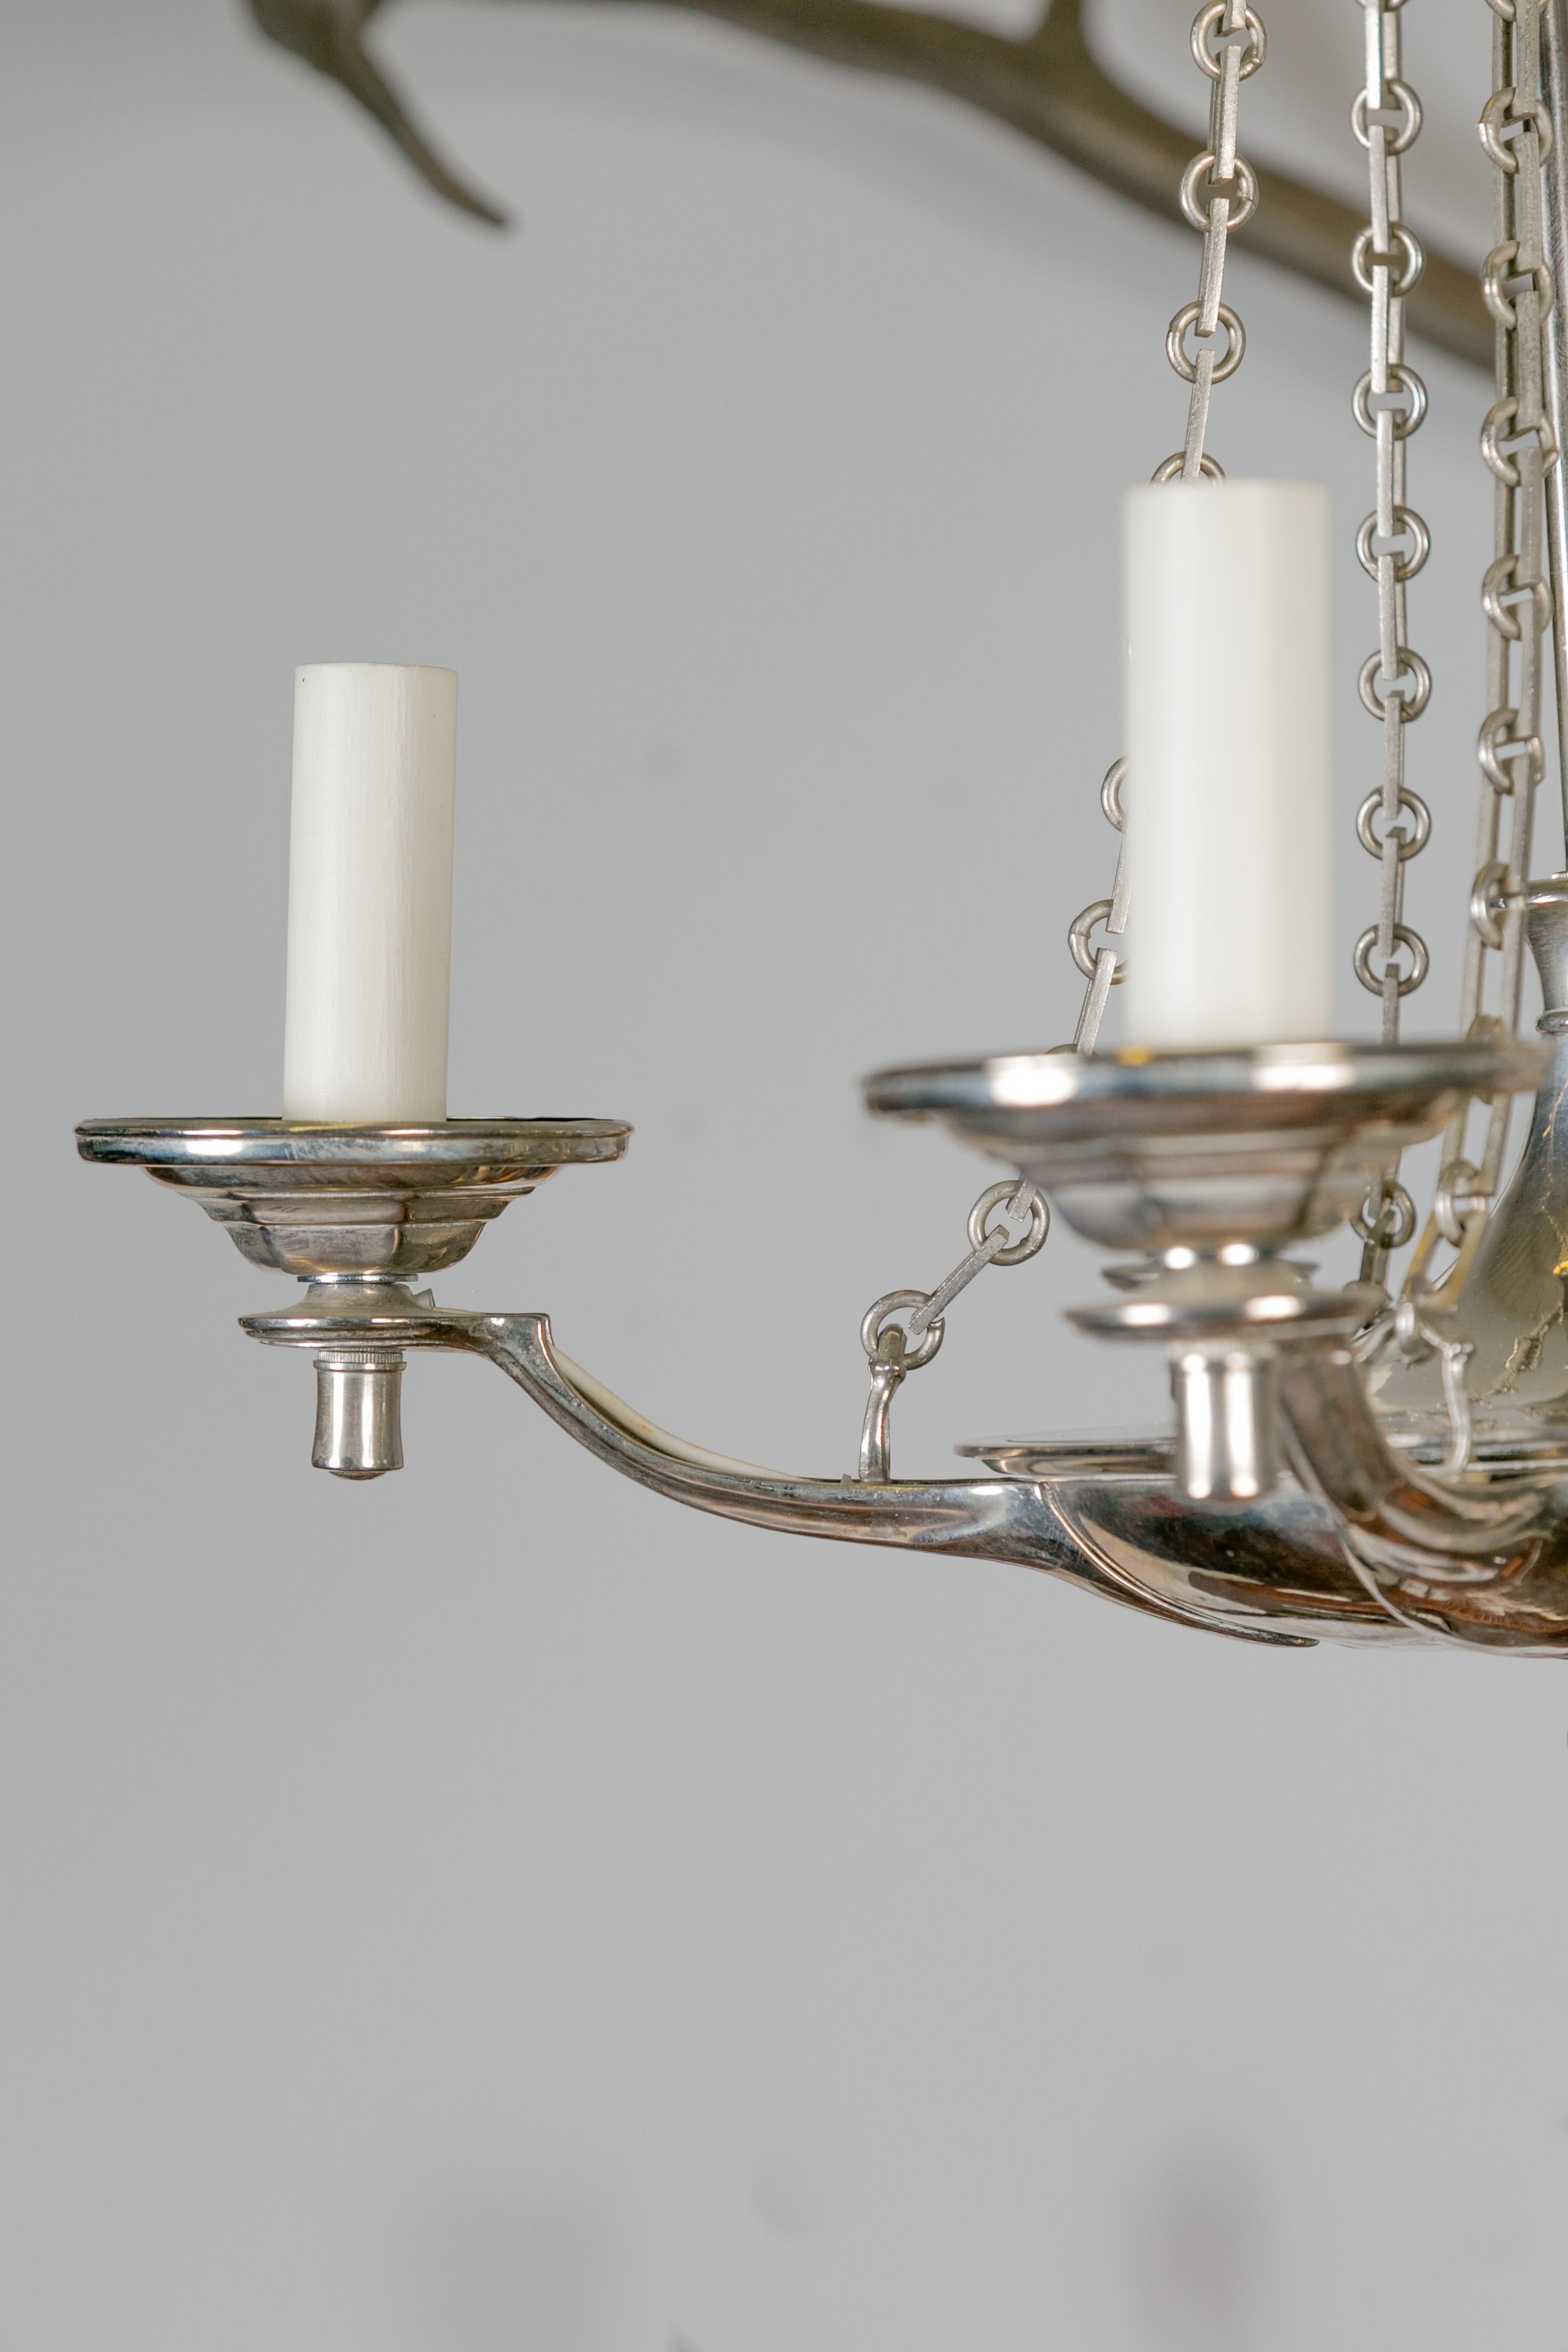 English Vintage Five-Light Nickel Chandelier with Profiled Links, circa 1970 For Sale 2